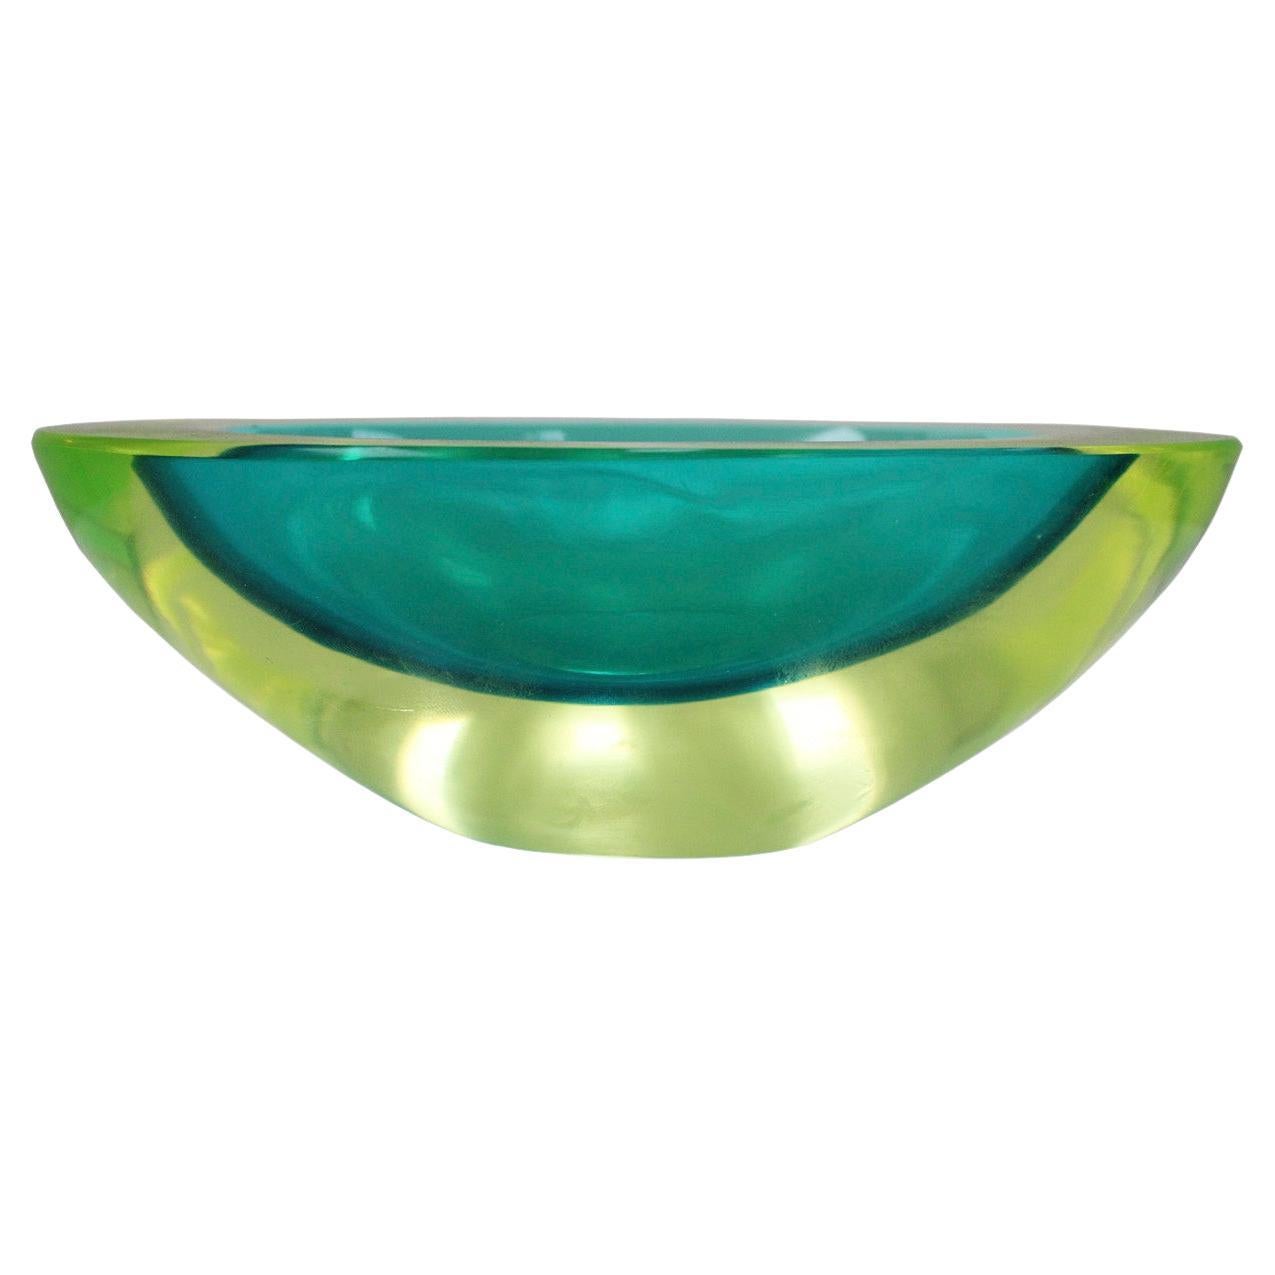 MidCentury Turquoise and yellow Sommerso Murano Glass Bowl by Flavio Poli 1950 For Sale